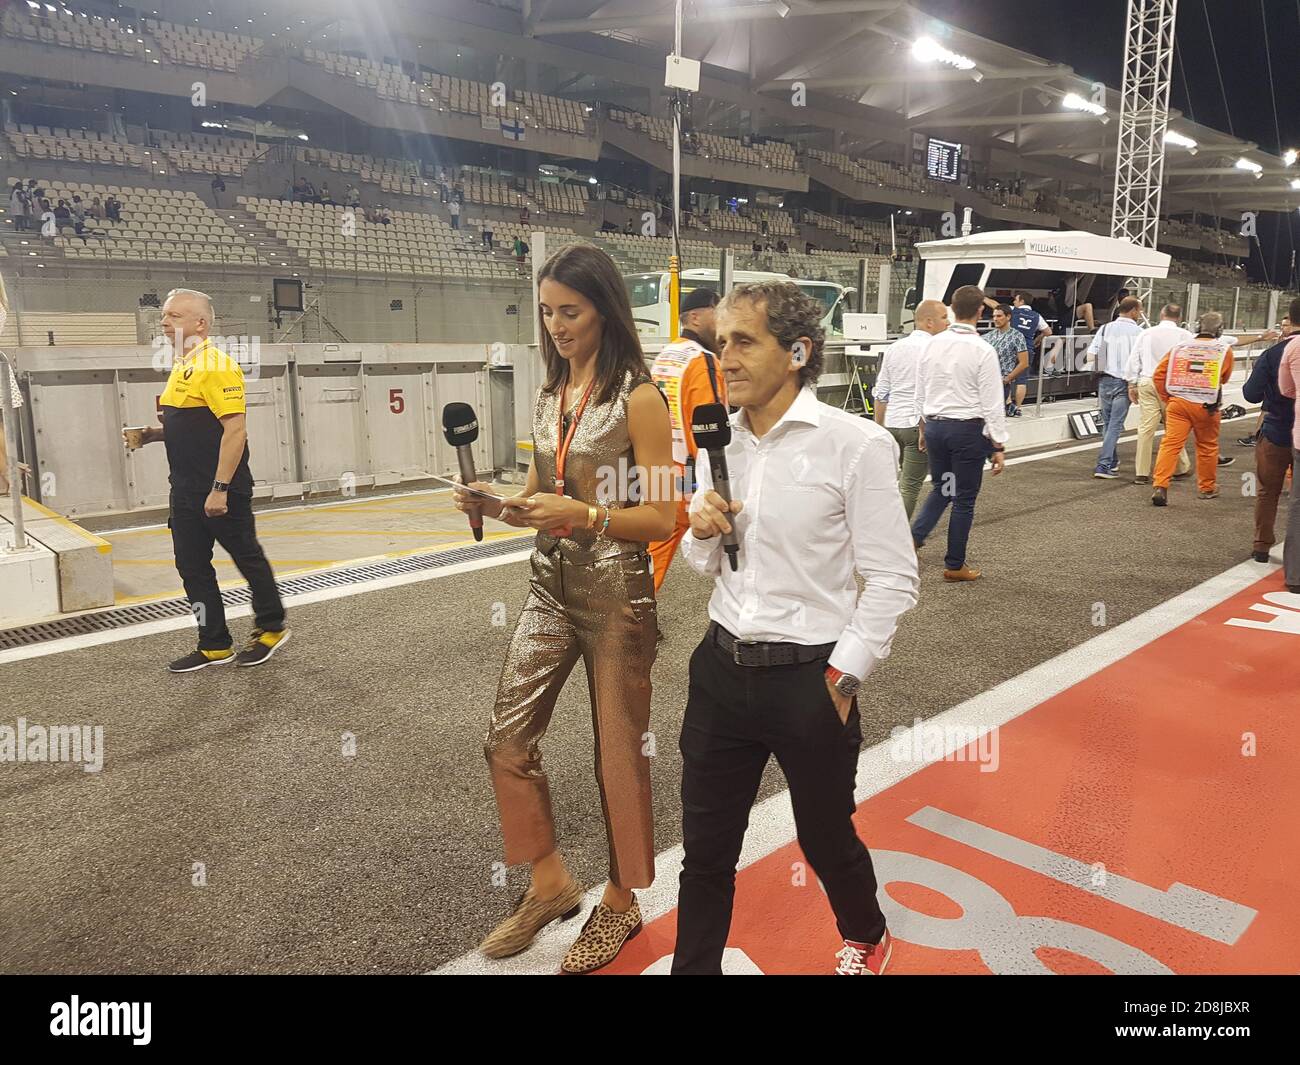 Famous ancient F1 driver Alain Prost walks by the Pit Line with a young female TV Presenter holding a microphone in her hands Stock Photo